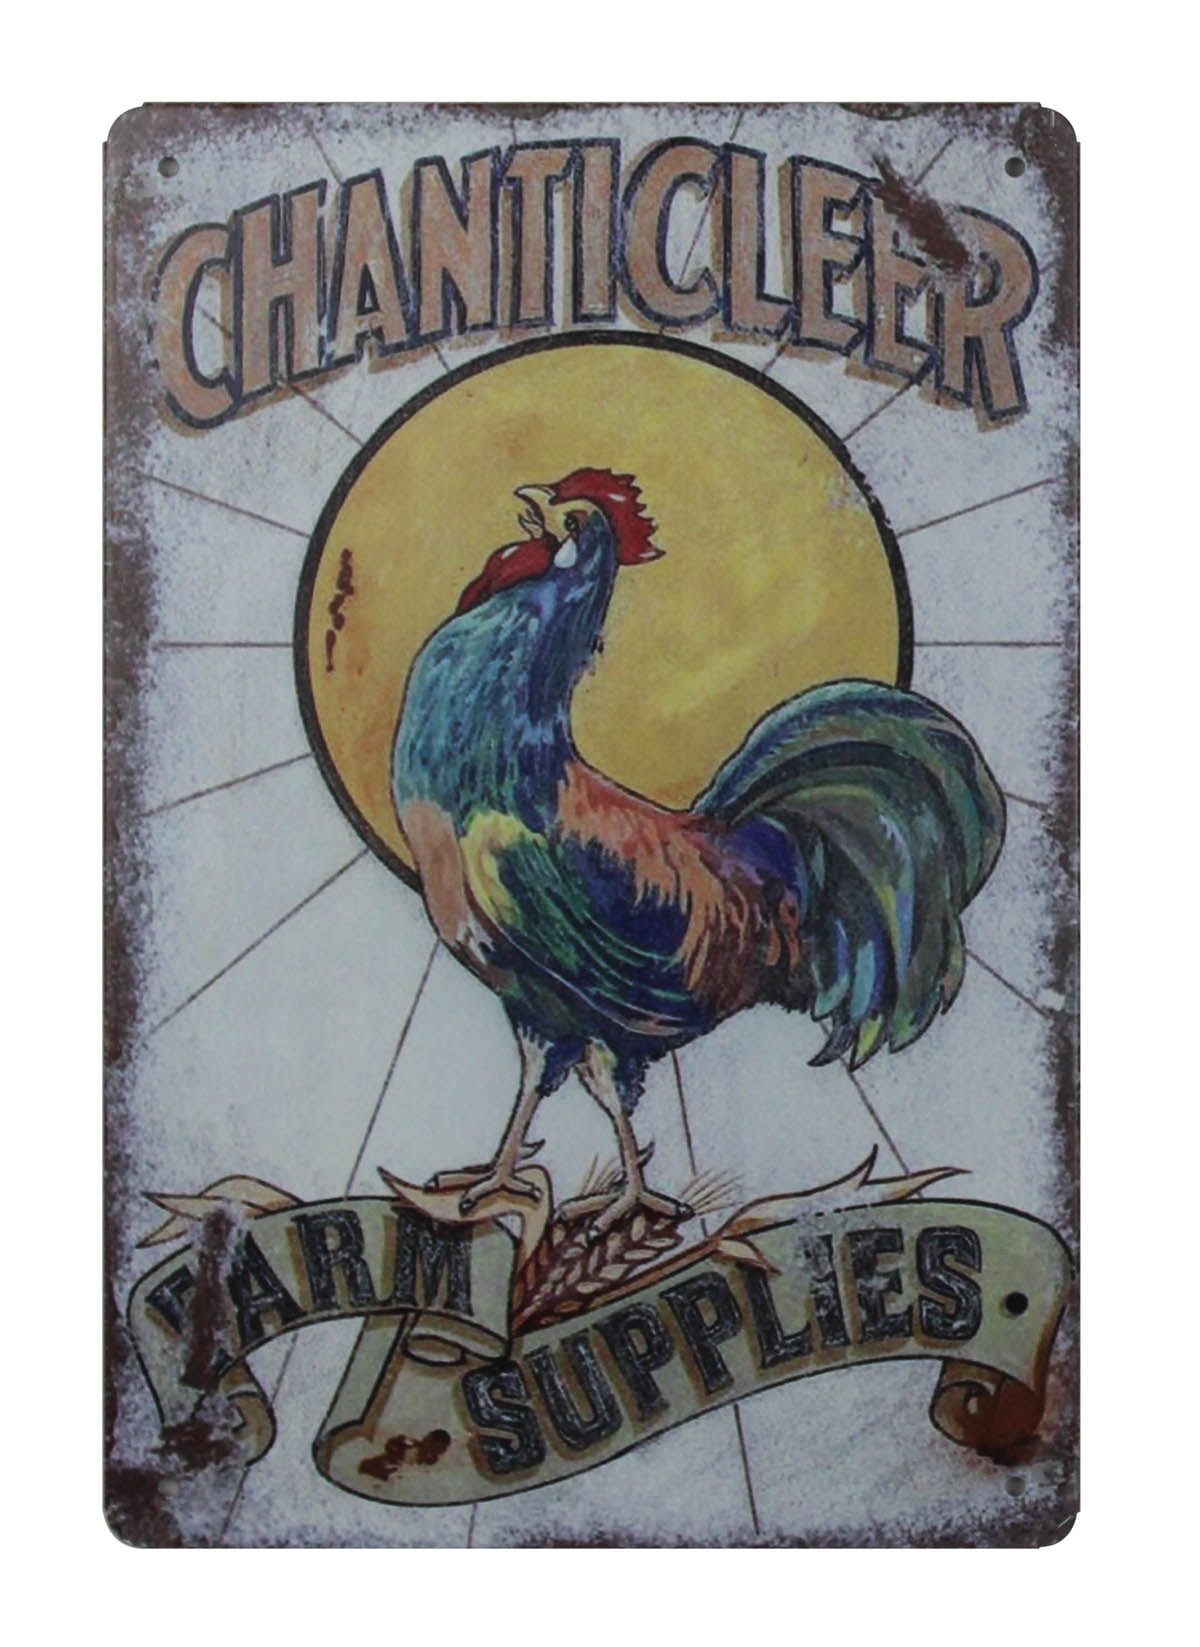 Chanticleer Rooster Farm Supply barn metal tin sign posters online 